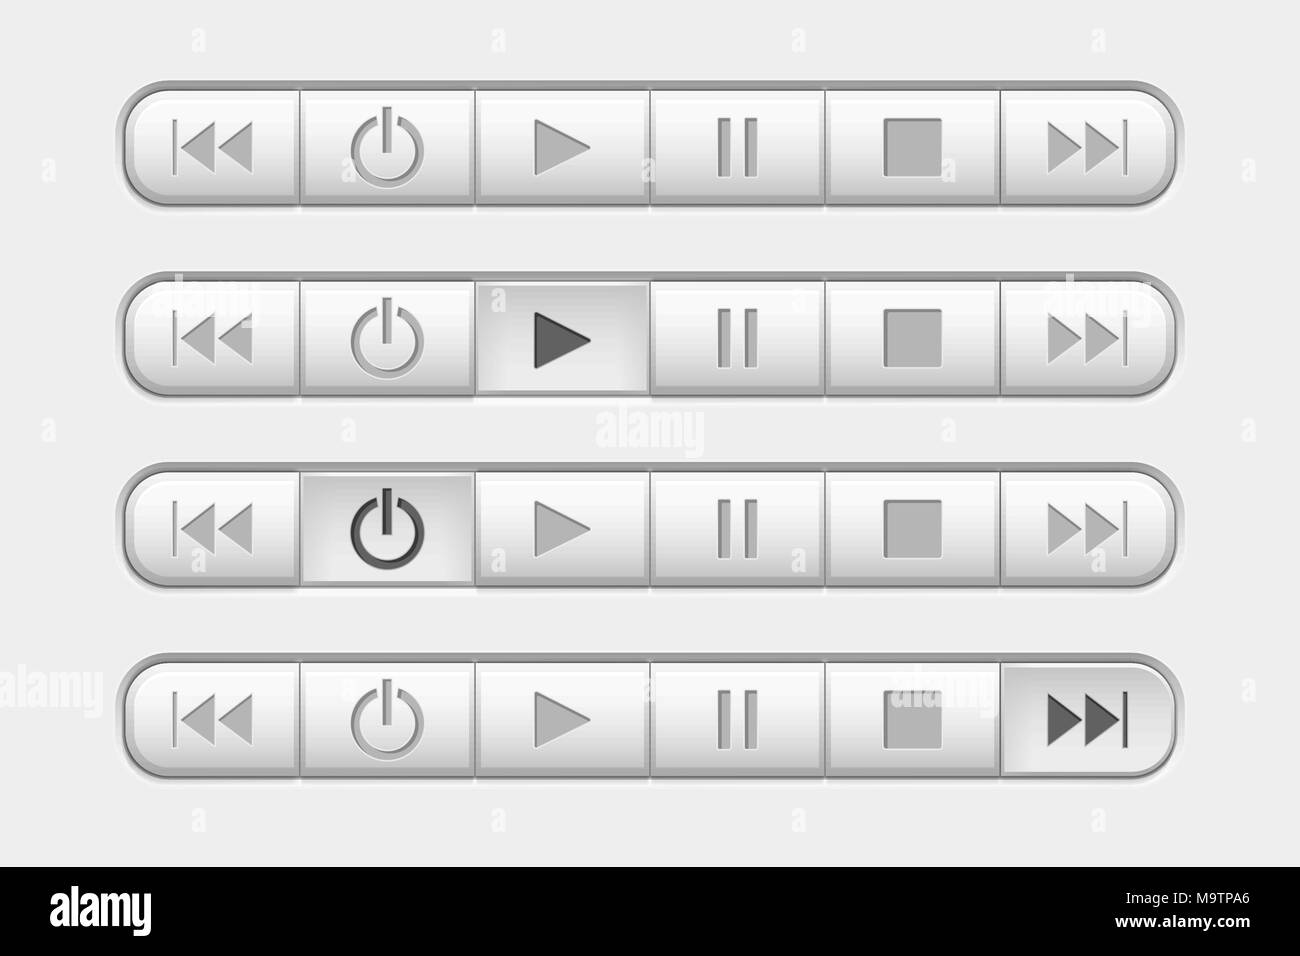 Media buttons control panel. With pressed buttons Stock Vector